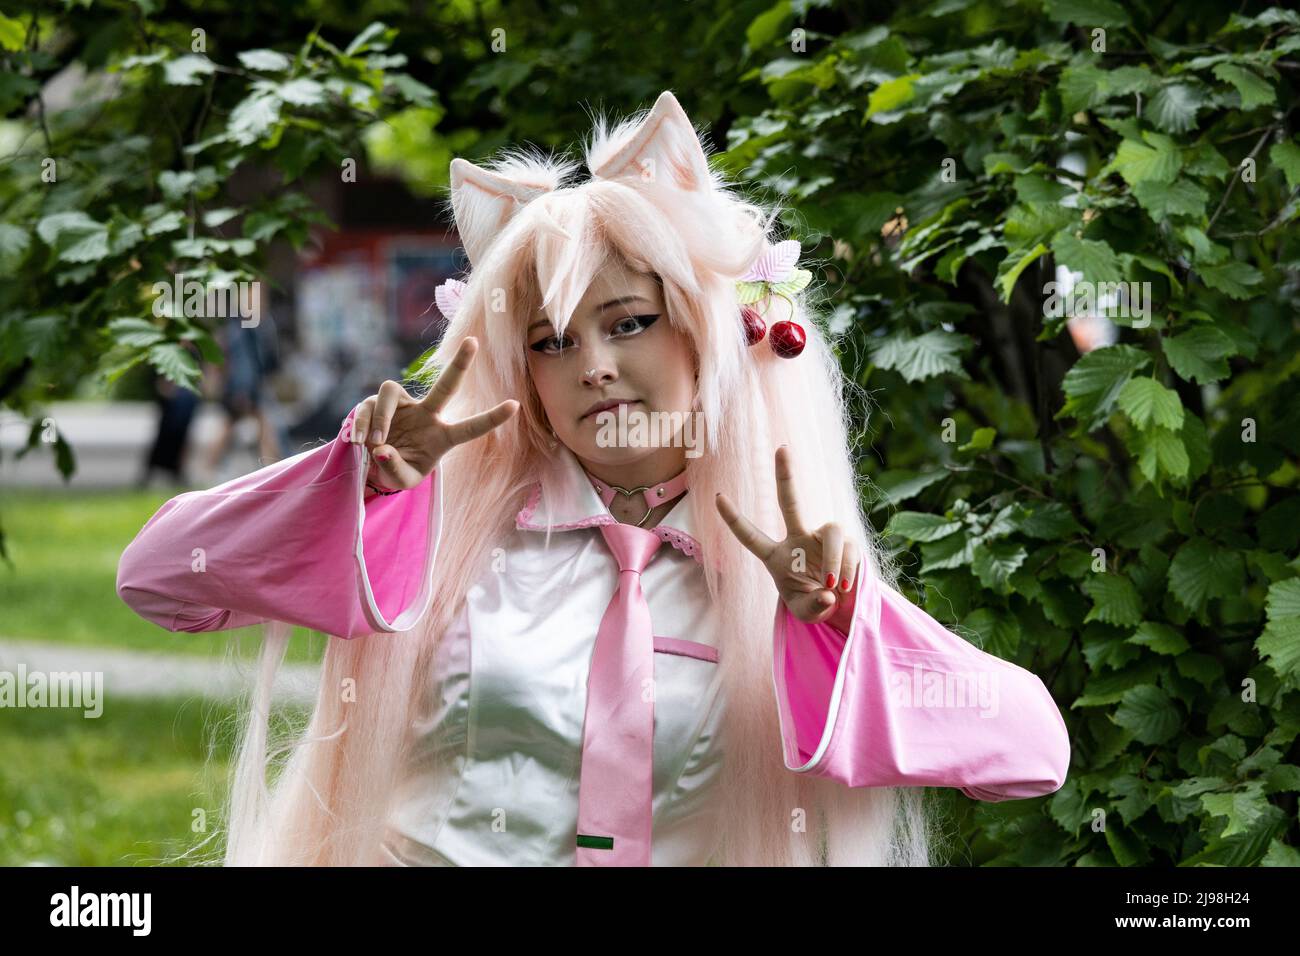 Düsseldorf, Germany. 21 May 2022. Cosplayers in colourful costumes. The annual Japan Day festival attracts hundreds of thousands of visitors. Many dress in colourful Manga Anime costumes. Photo: Vibrant Pictures/Alamy Live News Stock Photo